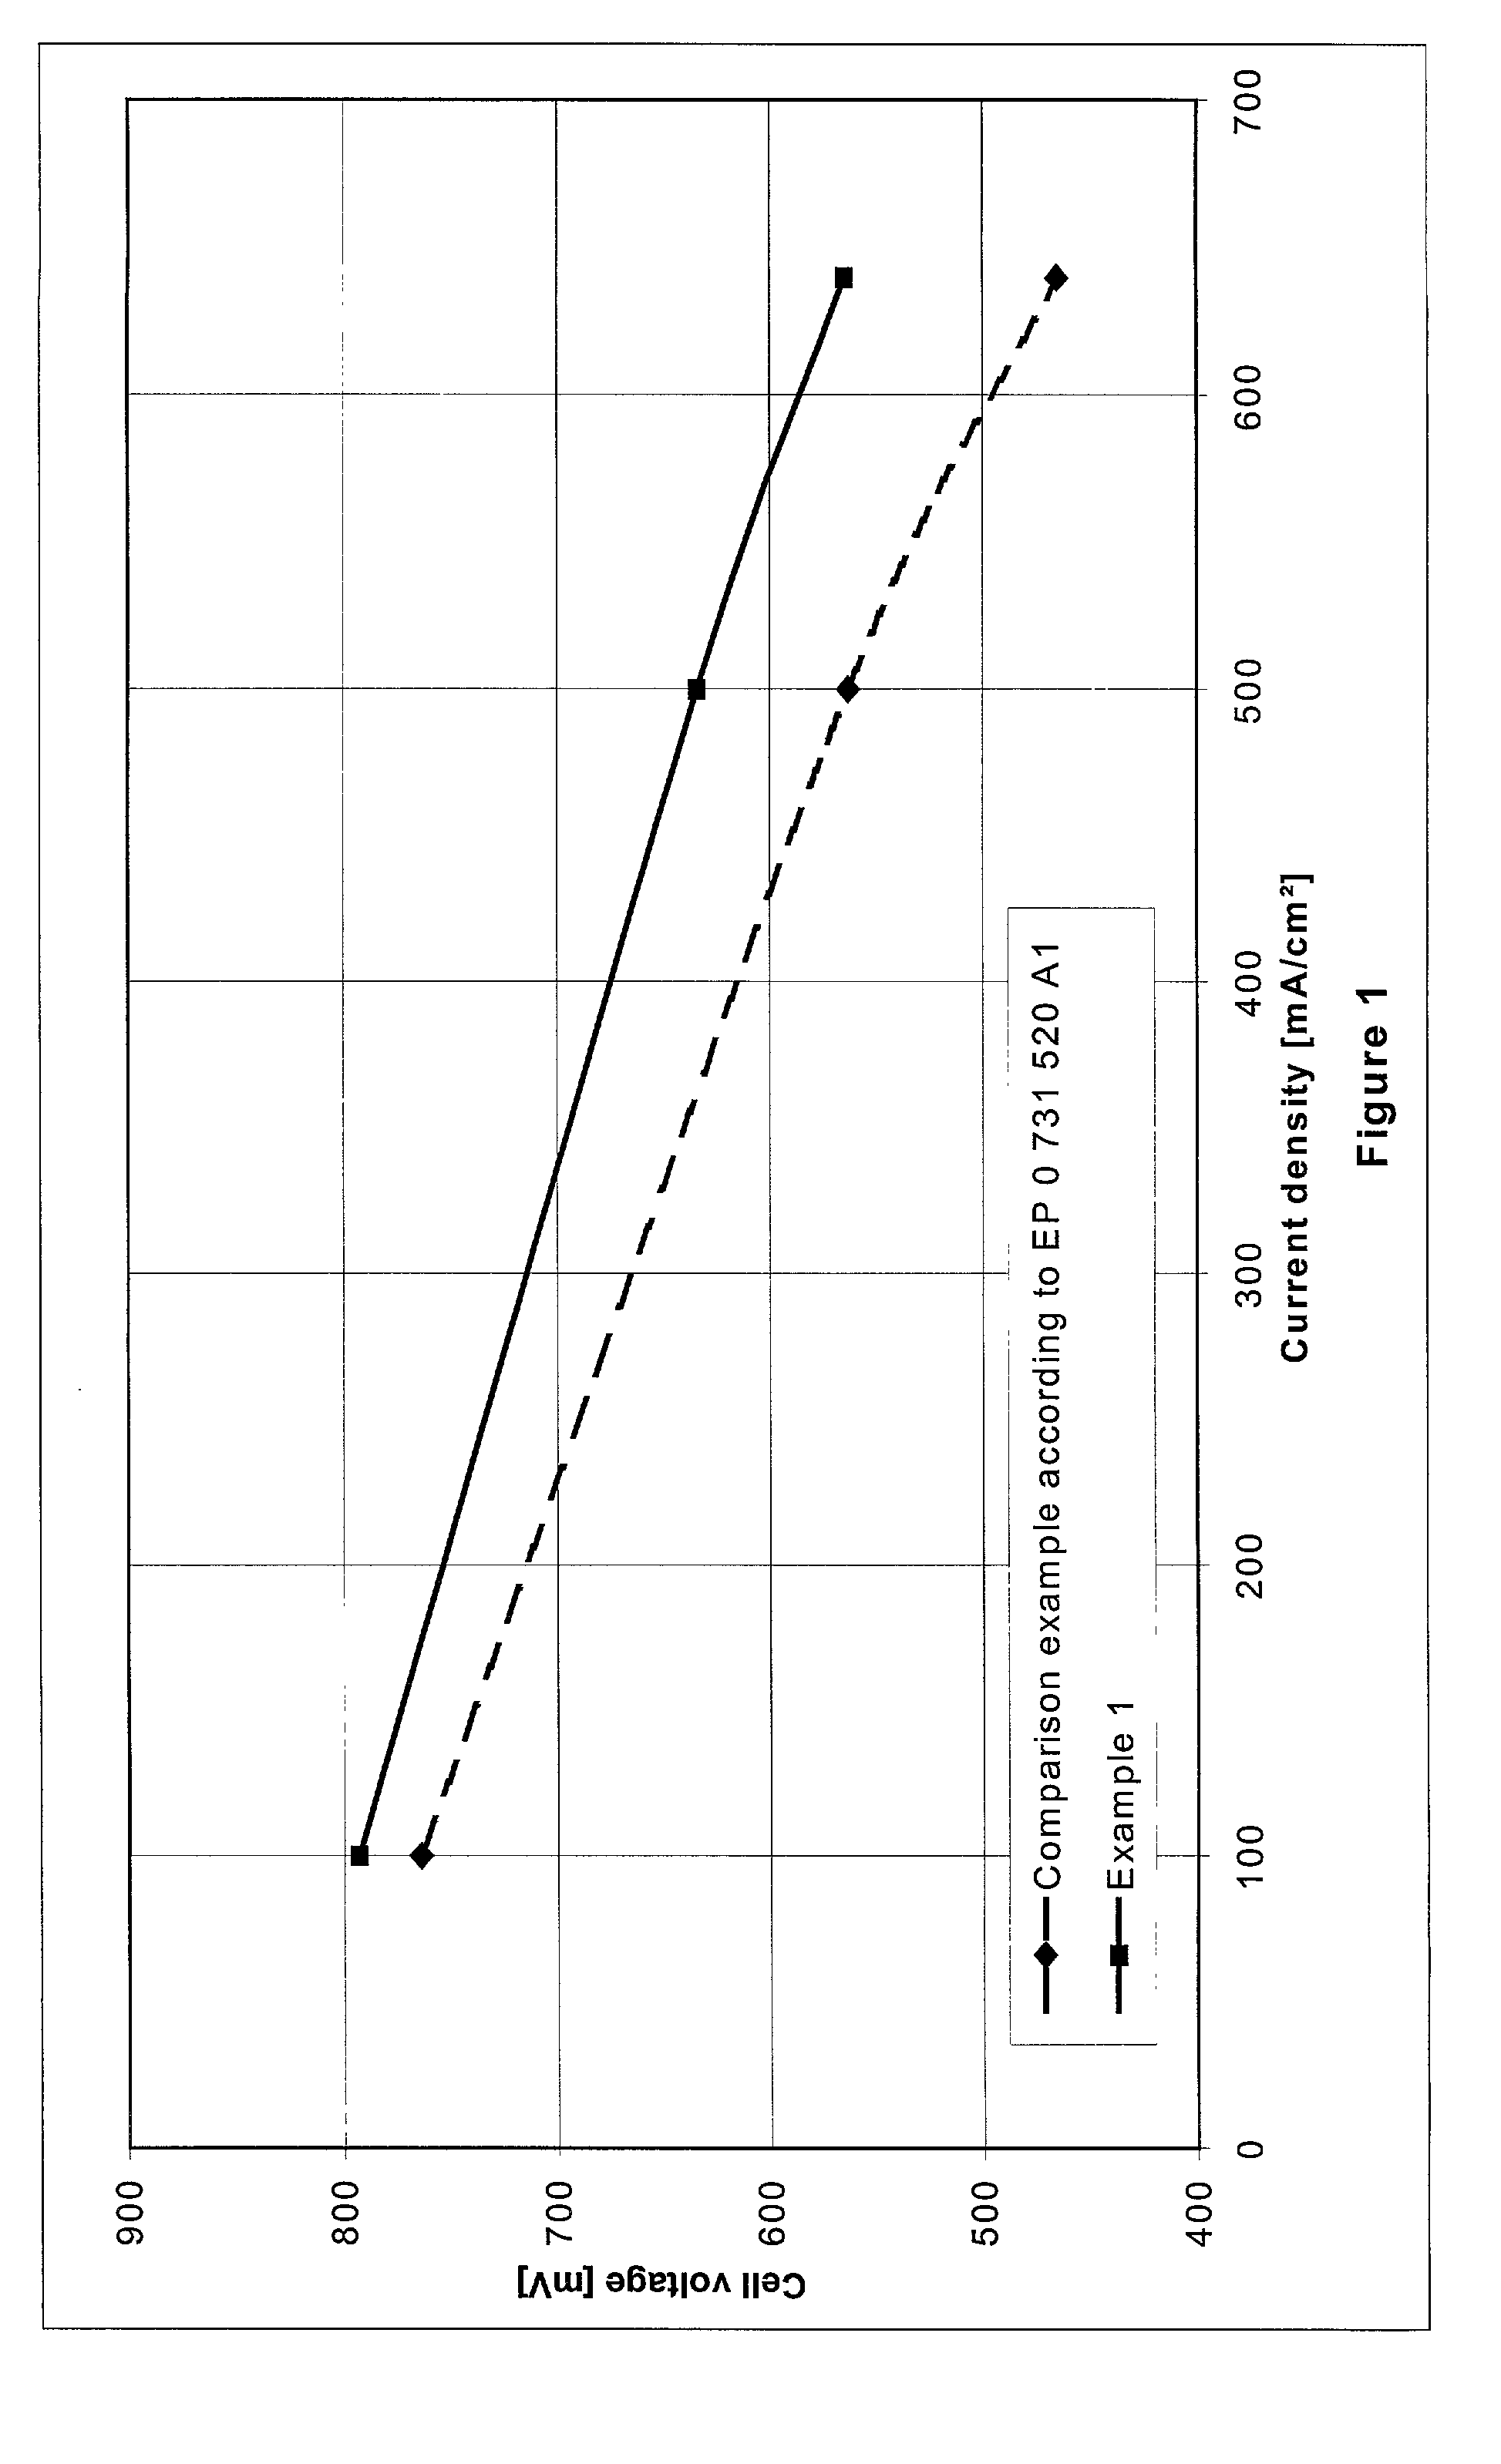 Ink for producing membrane electrode assemblies for fuel cells